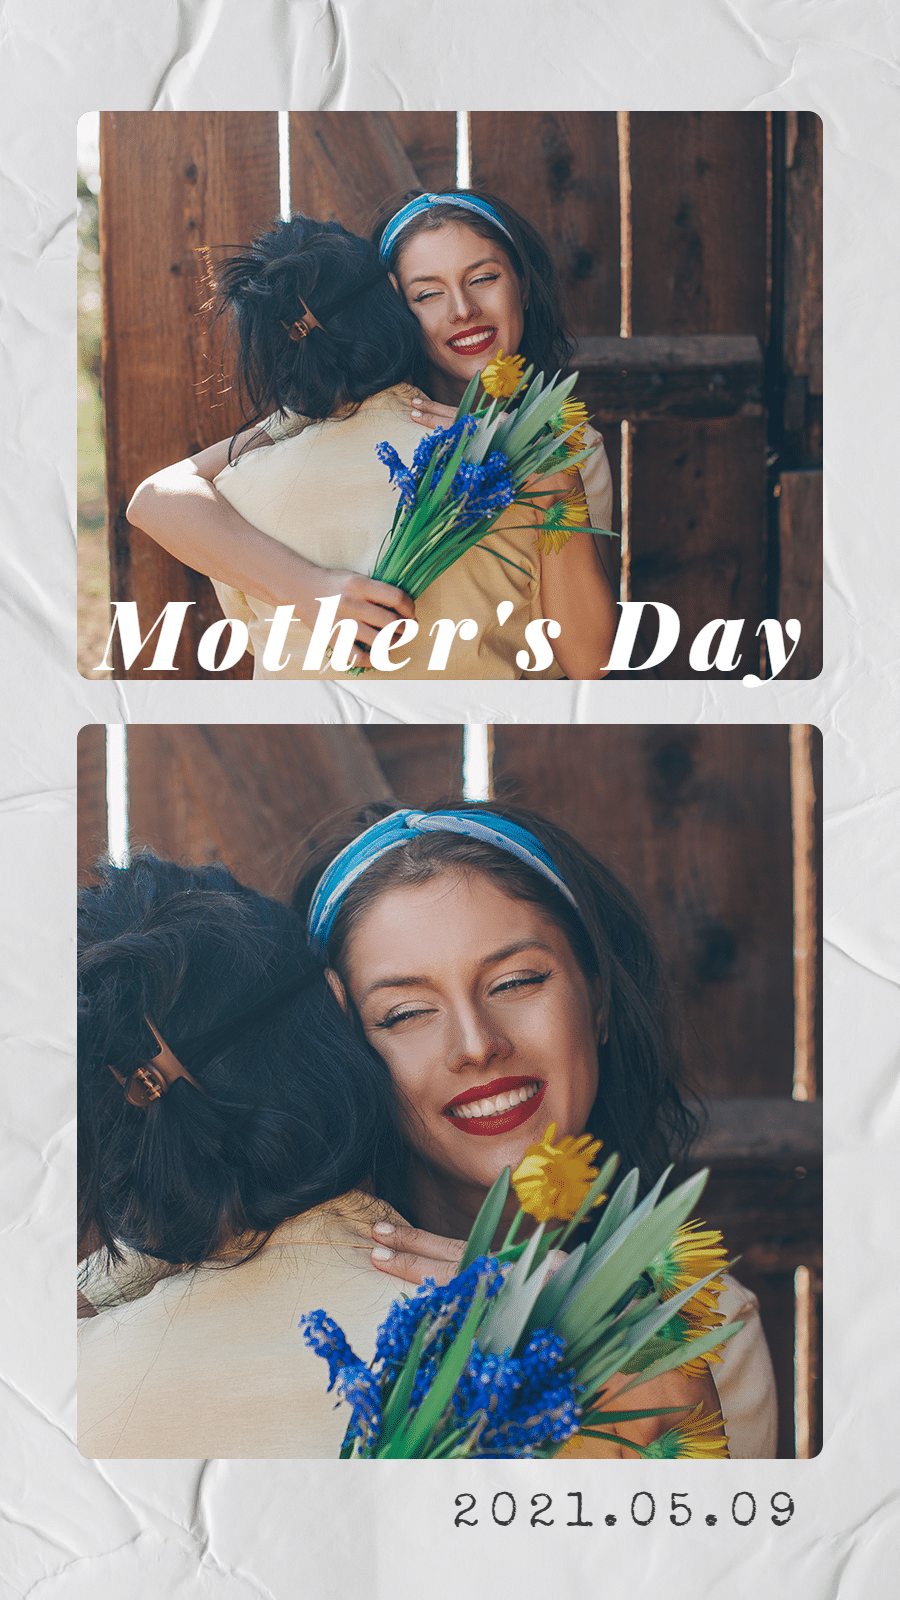 Literary Mother's Day Hug Photos Display Instagram Story预览效果